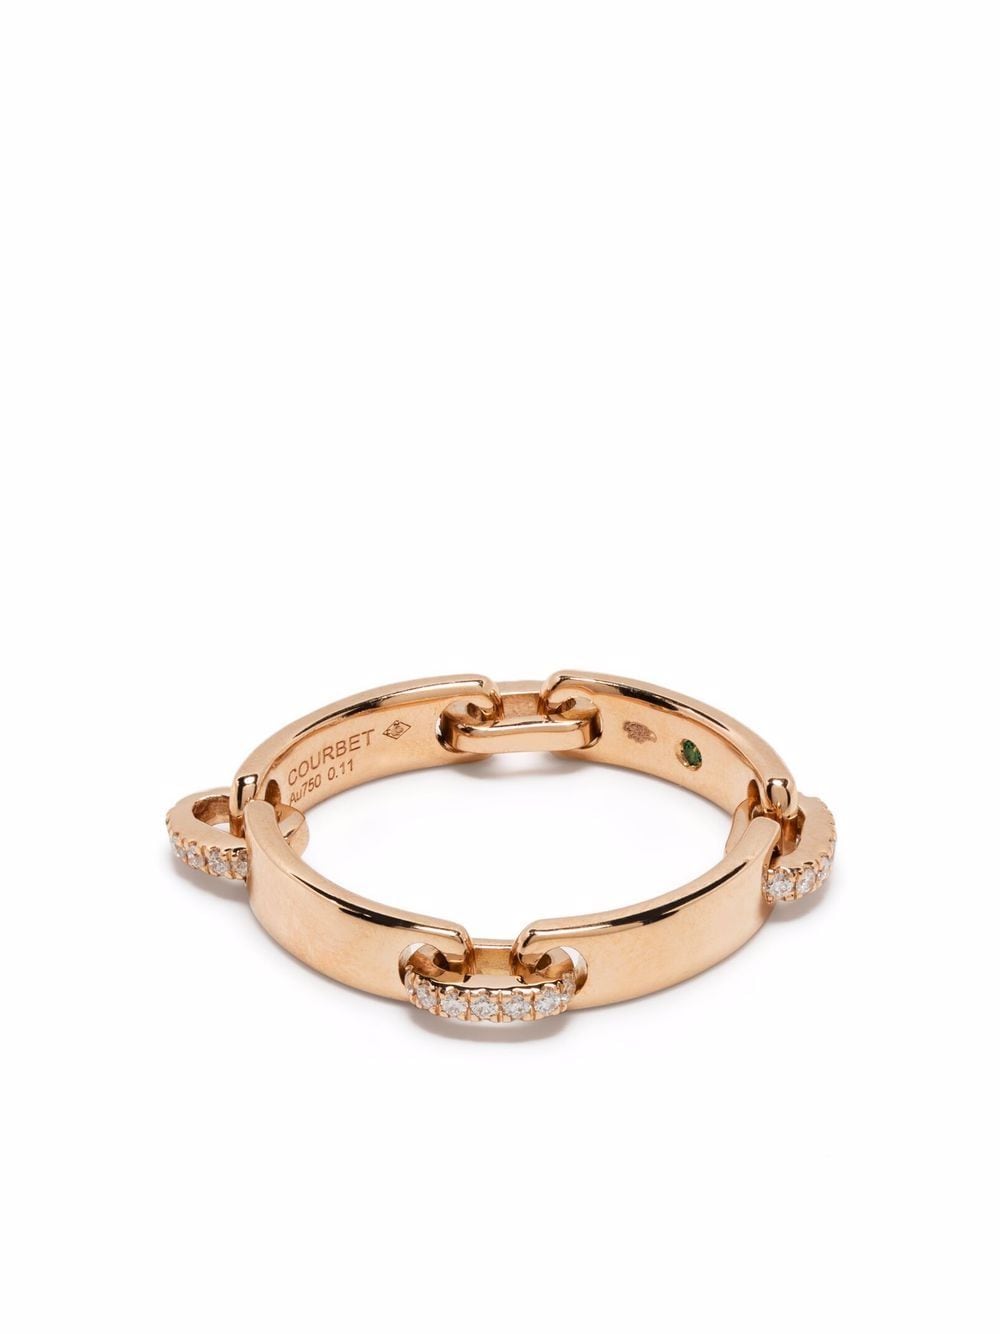 18kt recycled rose gold CELESTE laboratory-grown diamond band ring